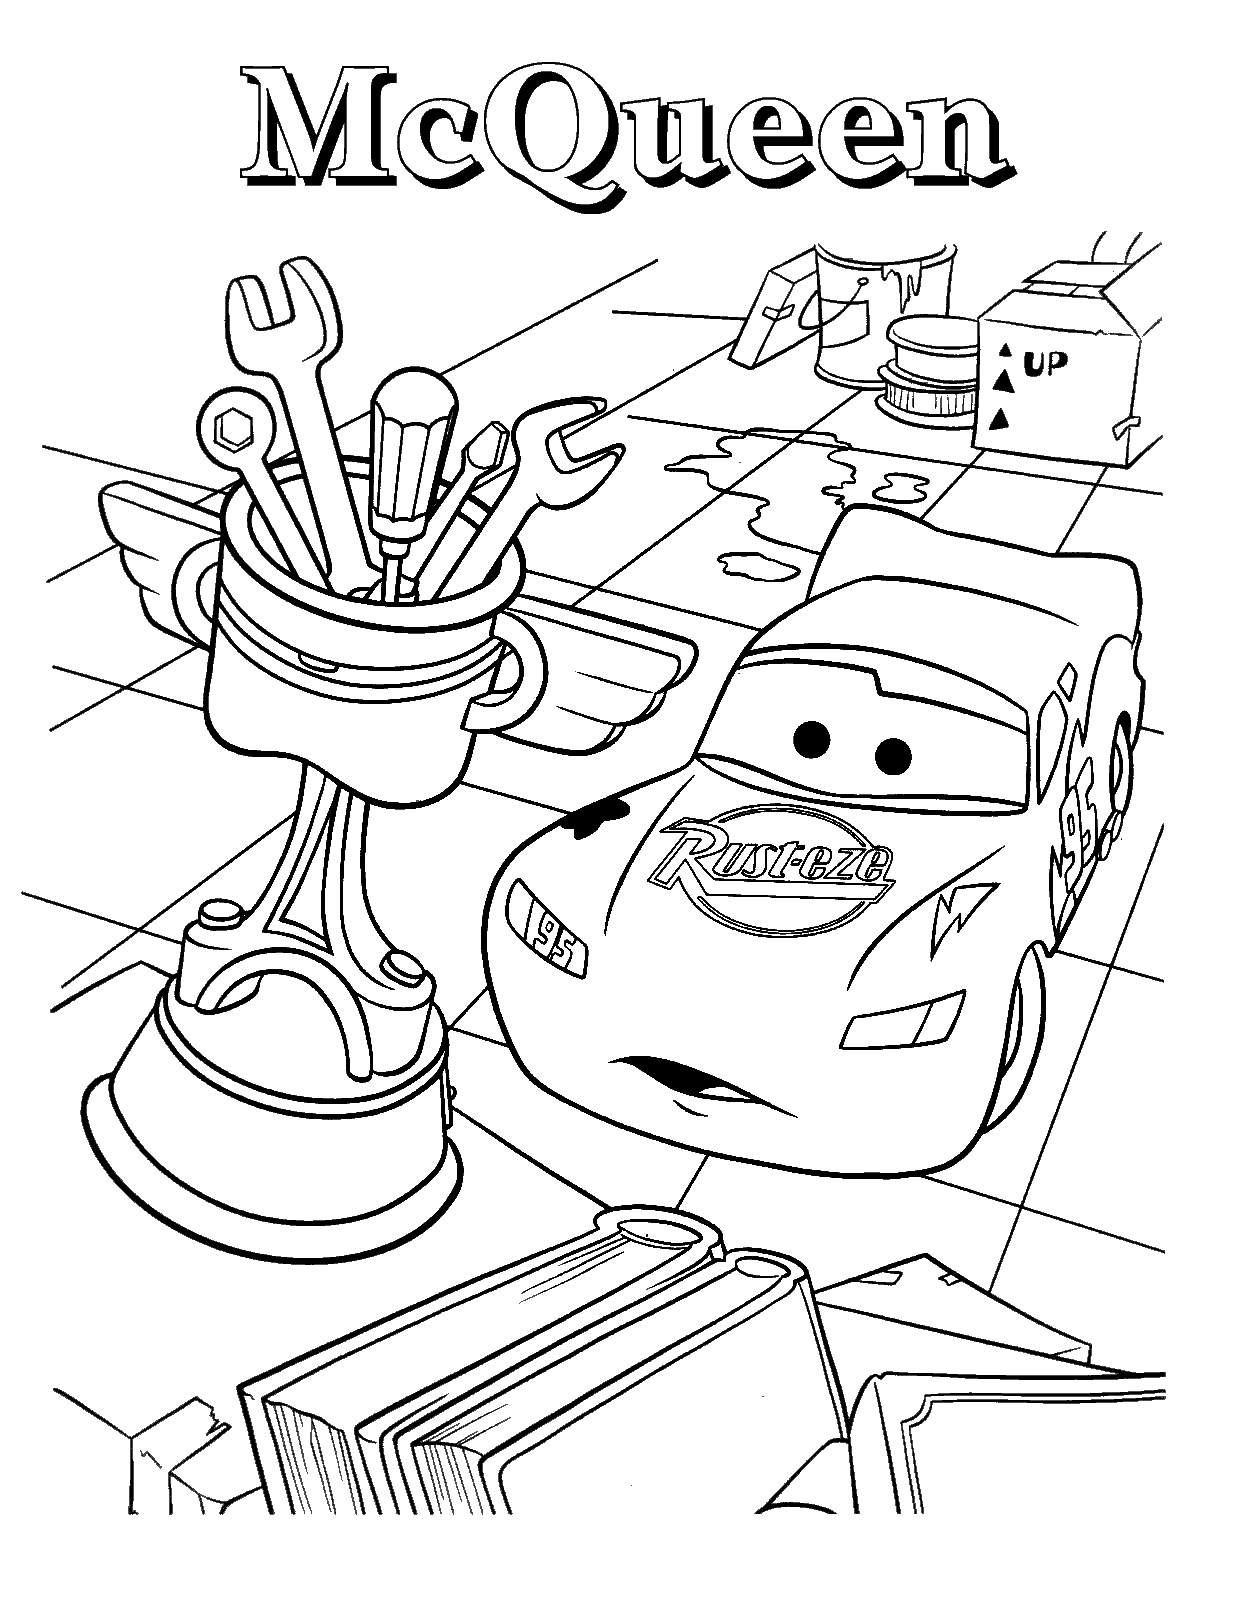 Free Printable Lightning McQueen Coloring Pages For Kids   Best ...